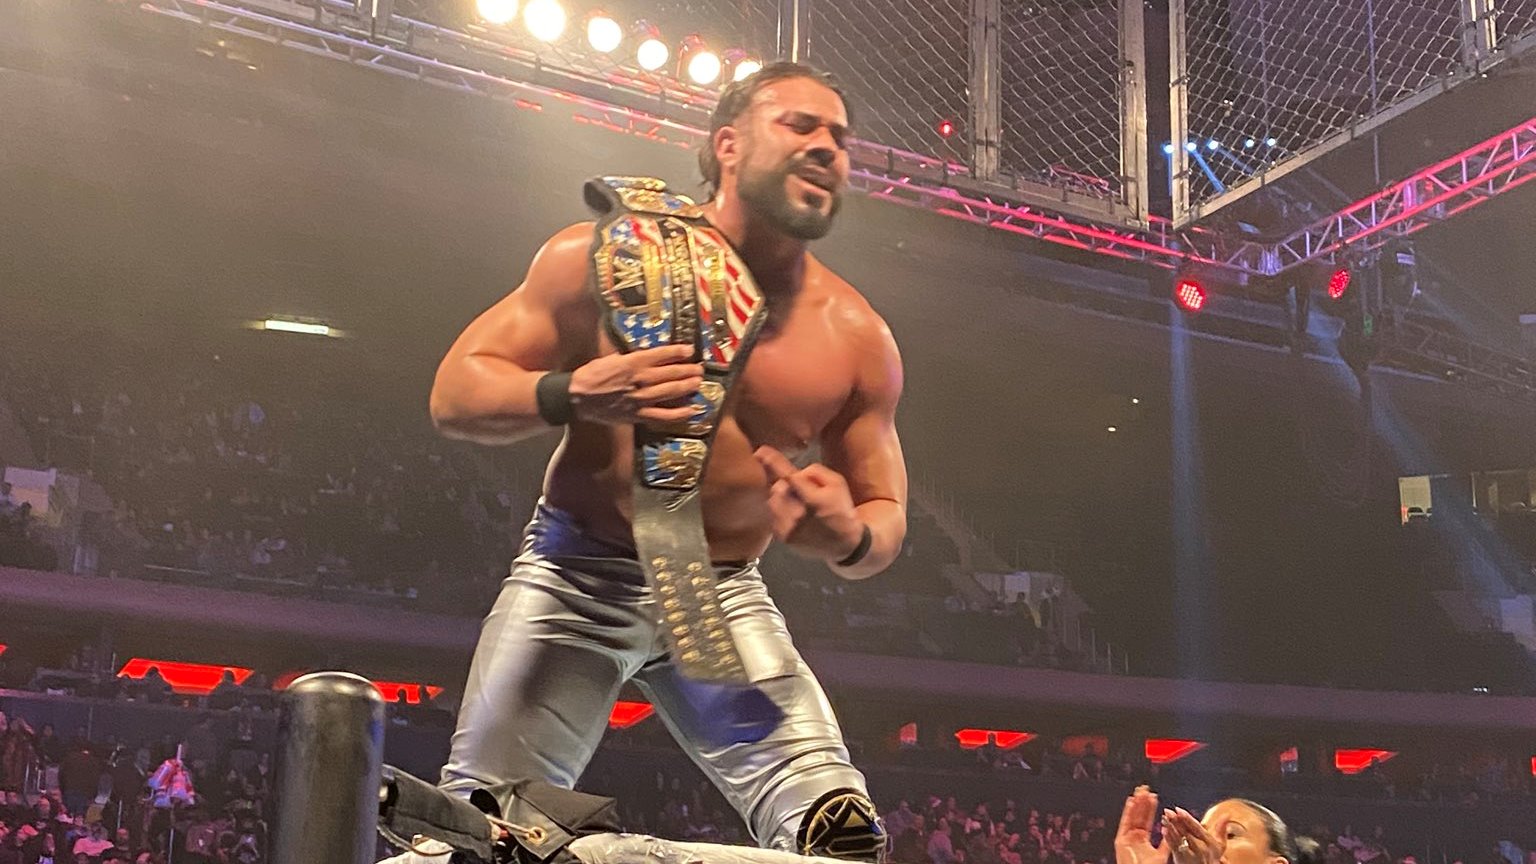 BREAKING NEWS: Andrade Captures The United States Title At WWE Live Event